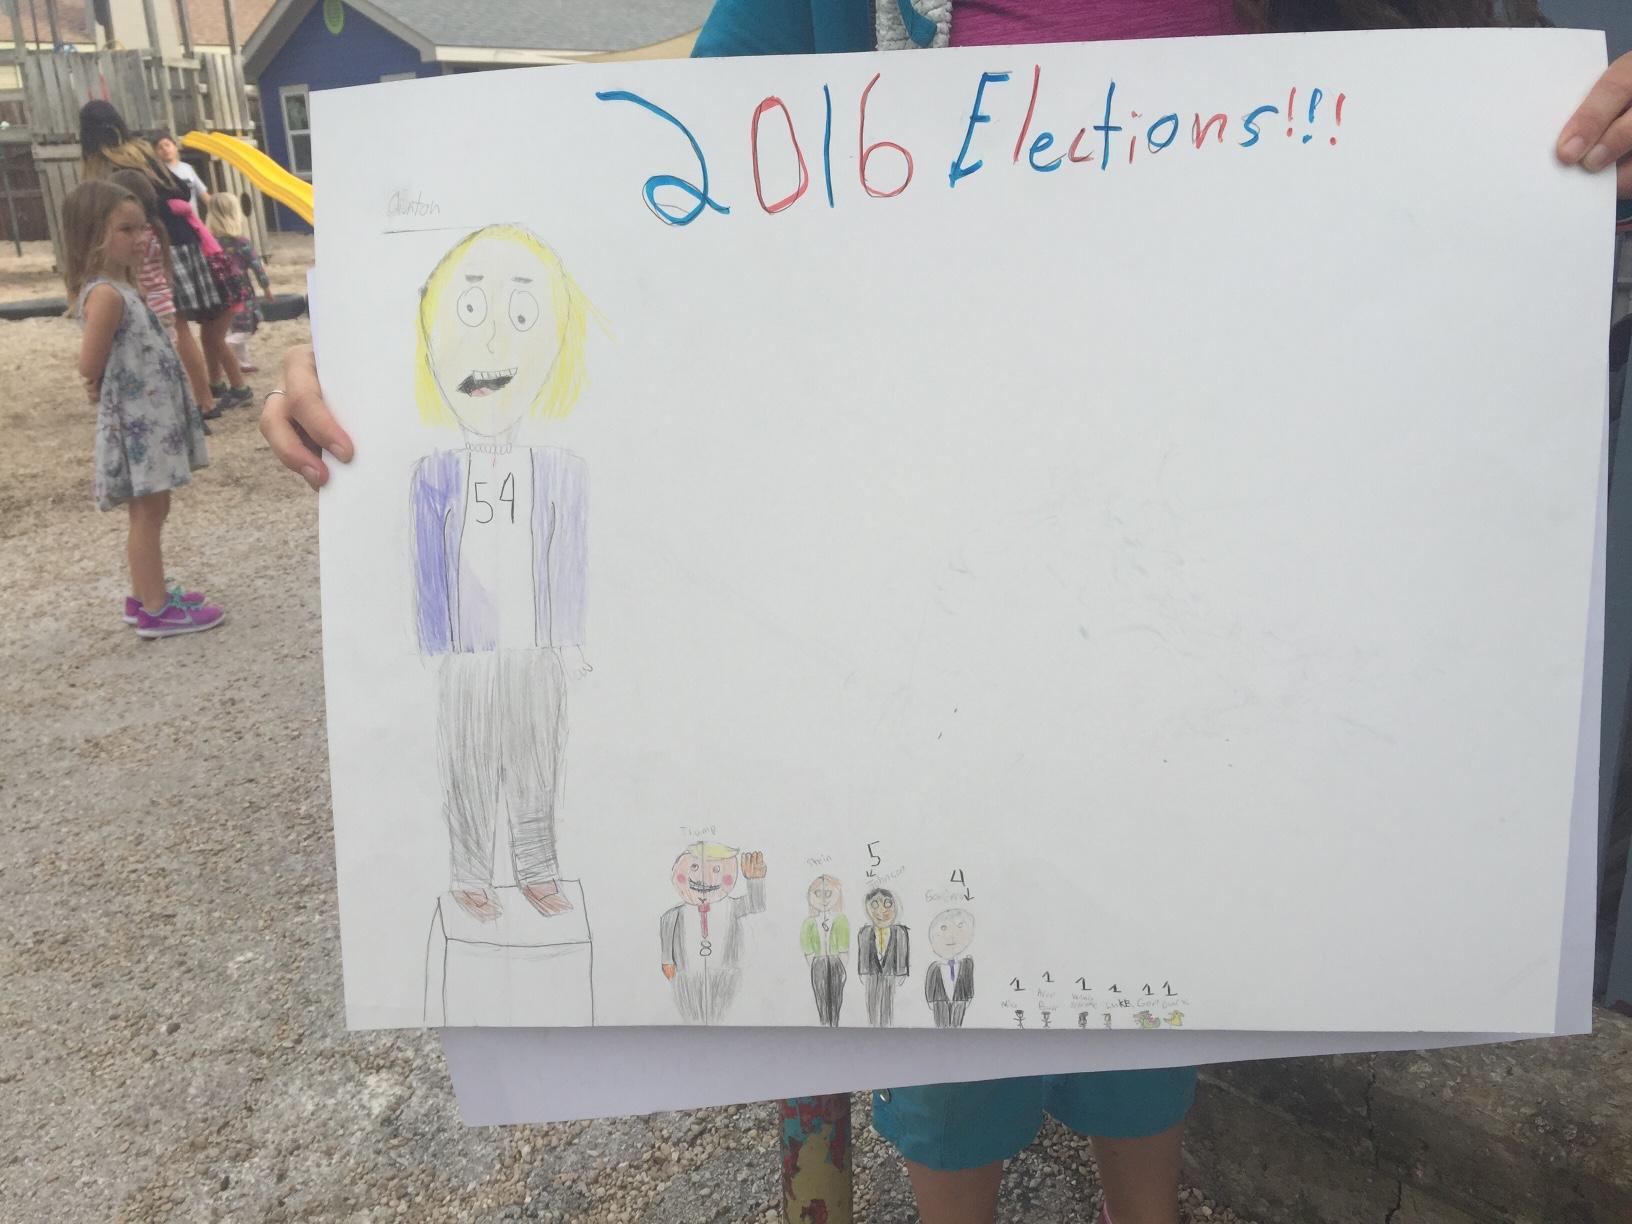 Another student-drawn chart depicts mock election winner Hillary Clinton as larger than her presidential opponents, like in a bar chart.